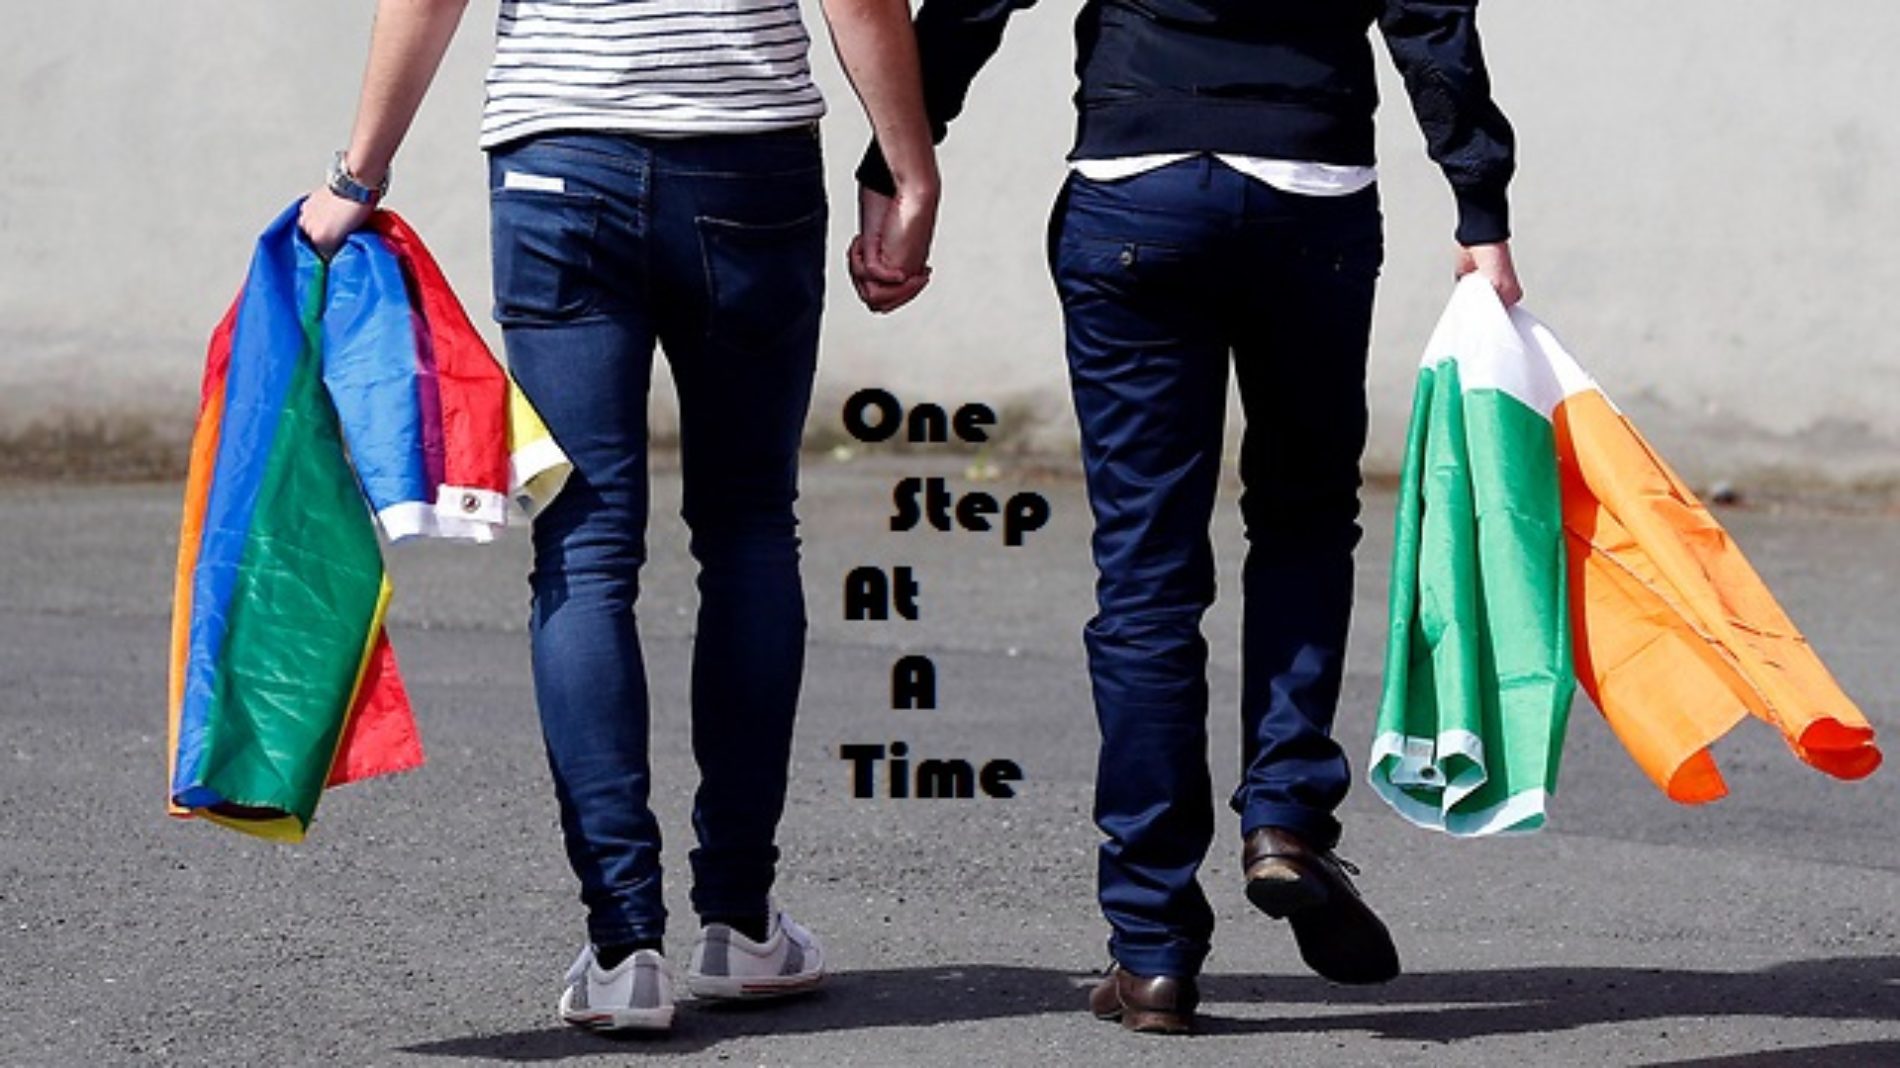 ONE STEP AT A TIME (Episode 3)